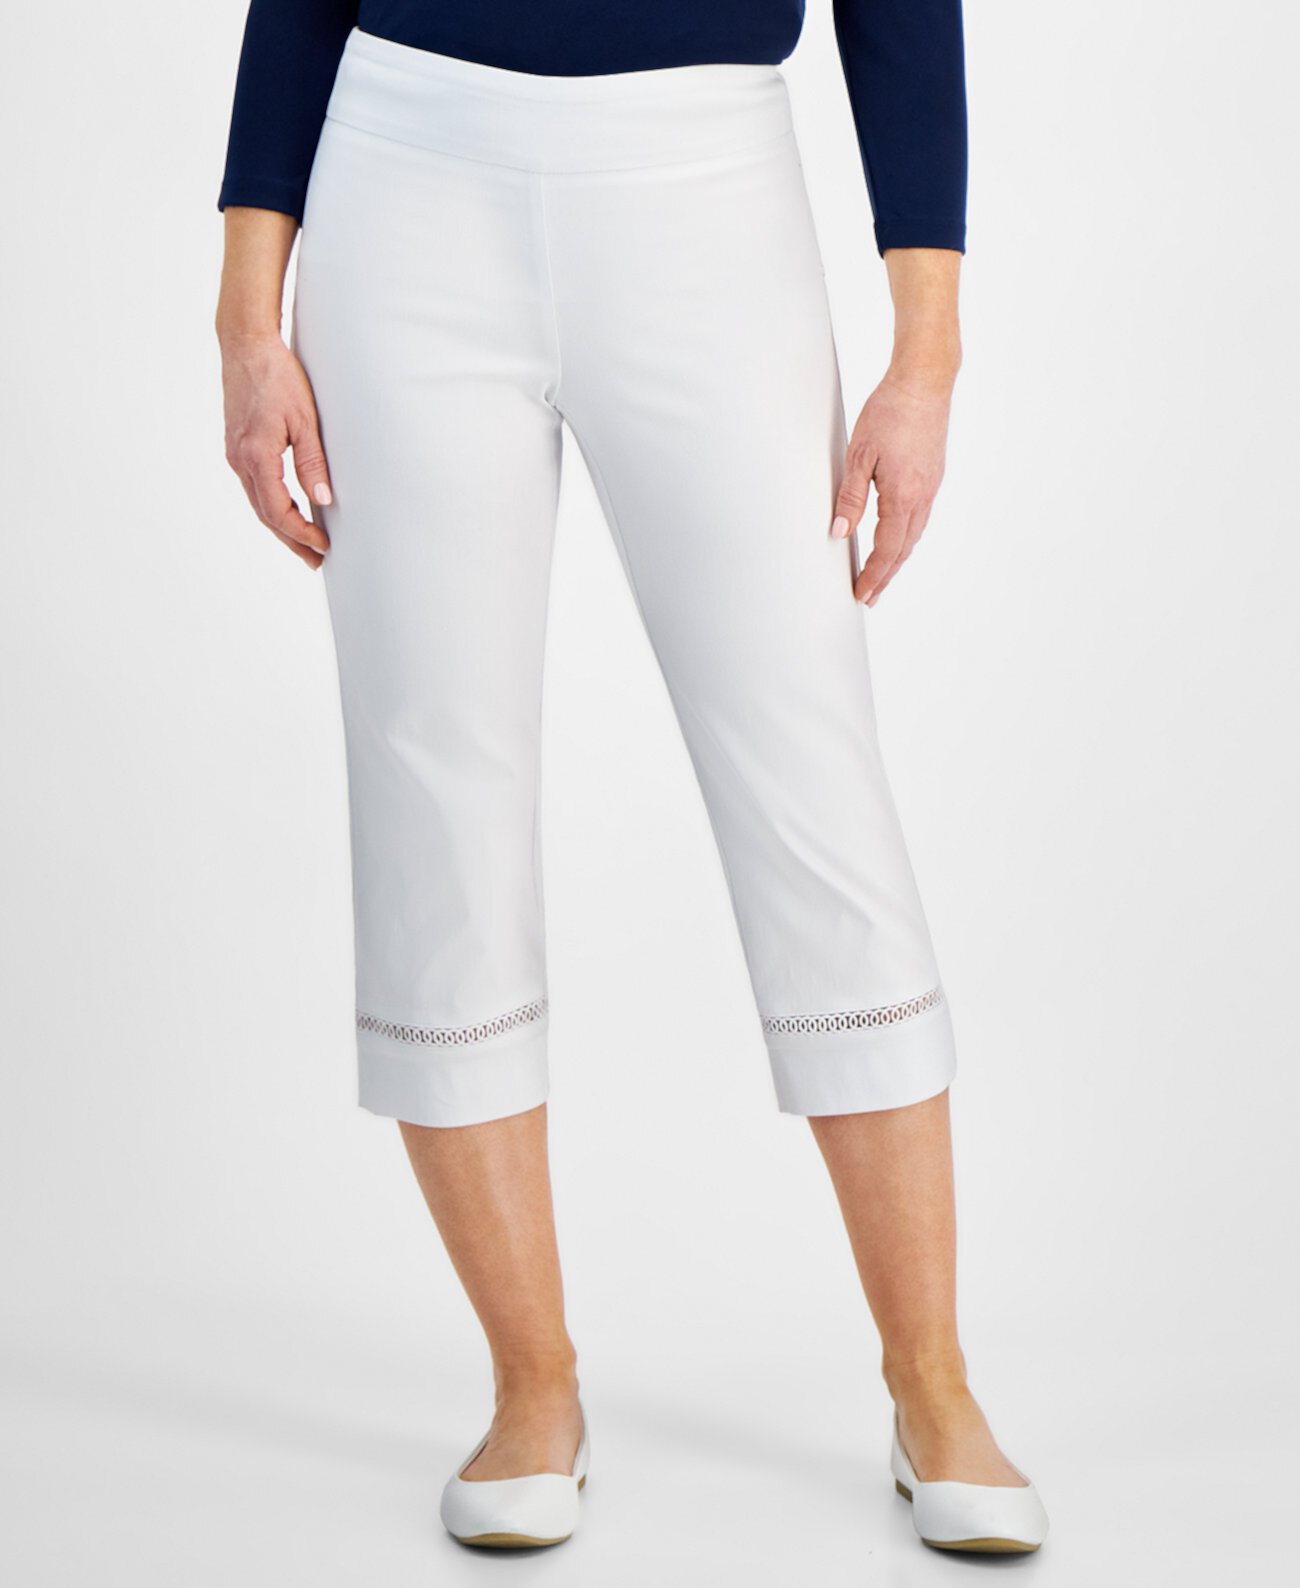 Petite Mid Rise Pull-On Capri Pants, Created for Macy's J&M Collection